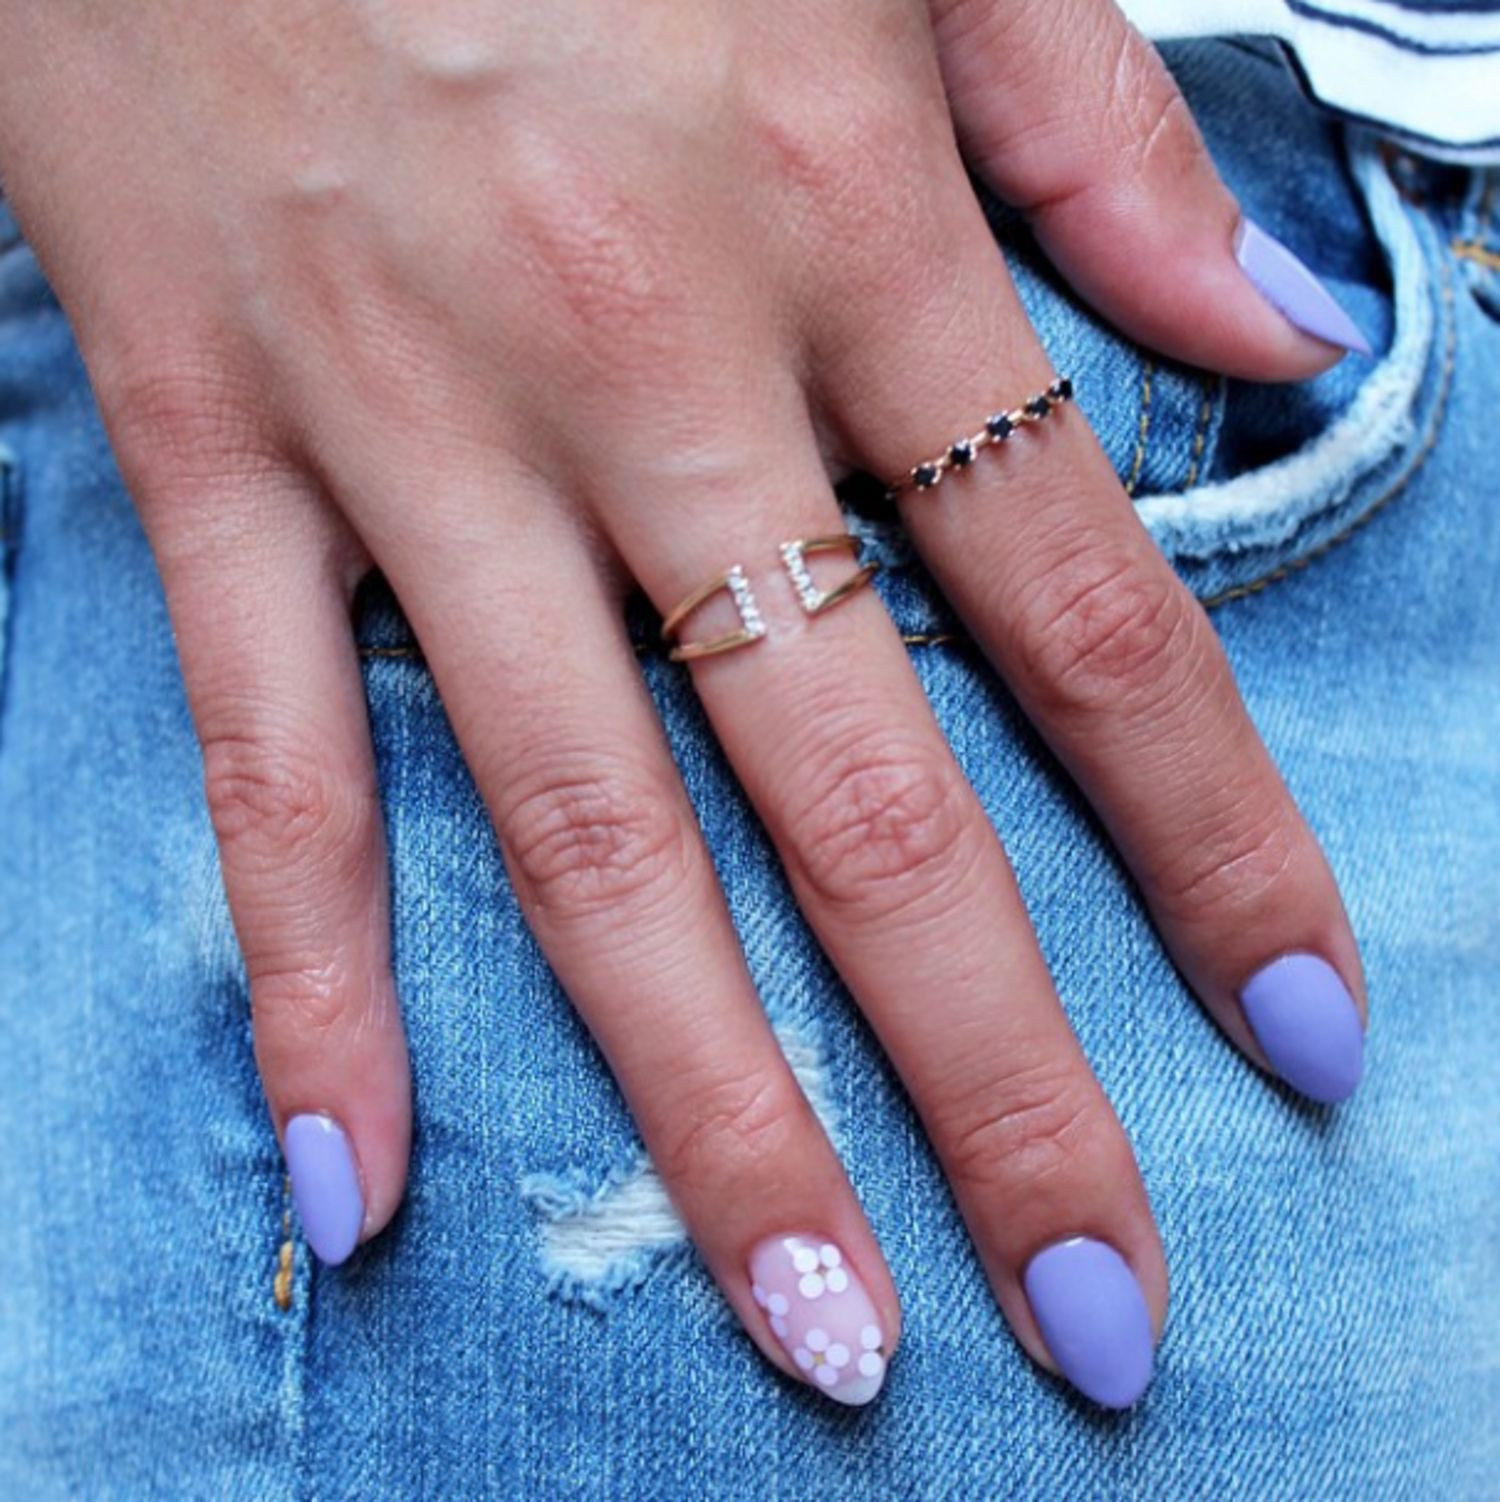 Nail Colors For Spring 2020
 Top 10 Best Spring Summer Nail Art Colors Trends 2019 2020